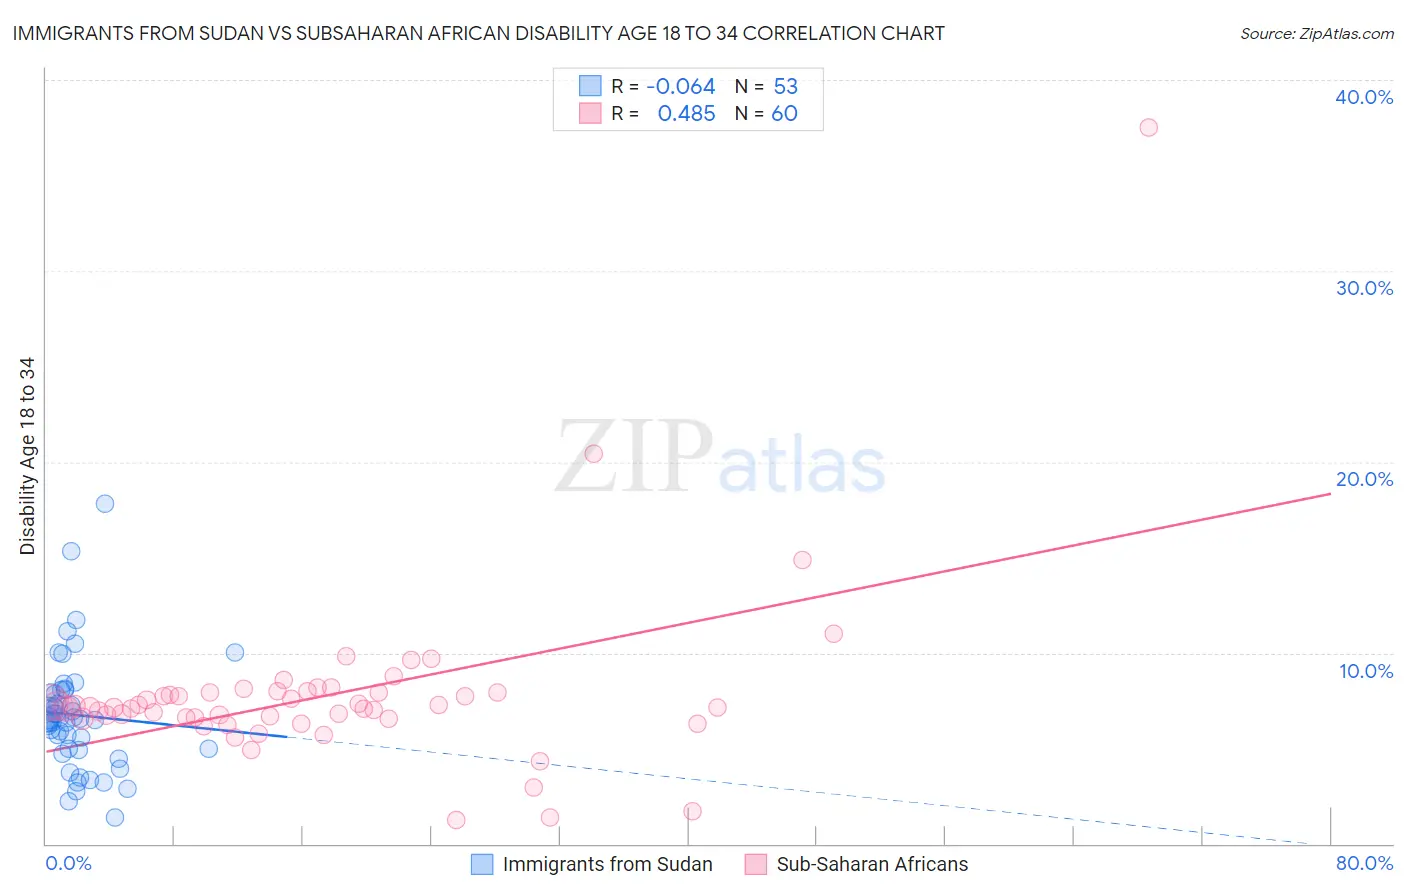 Immigrants from Sudan vs Subsaharan African Disability Age 18 to 34